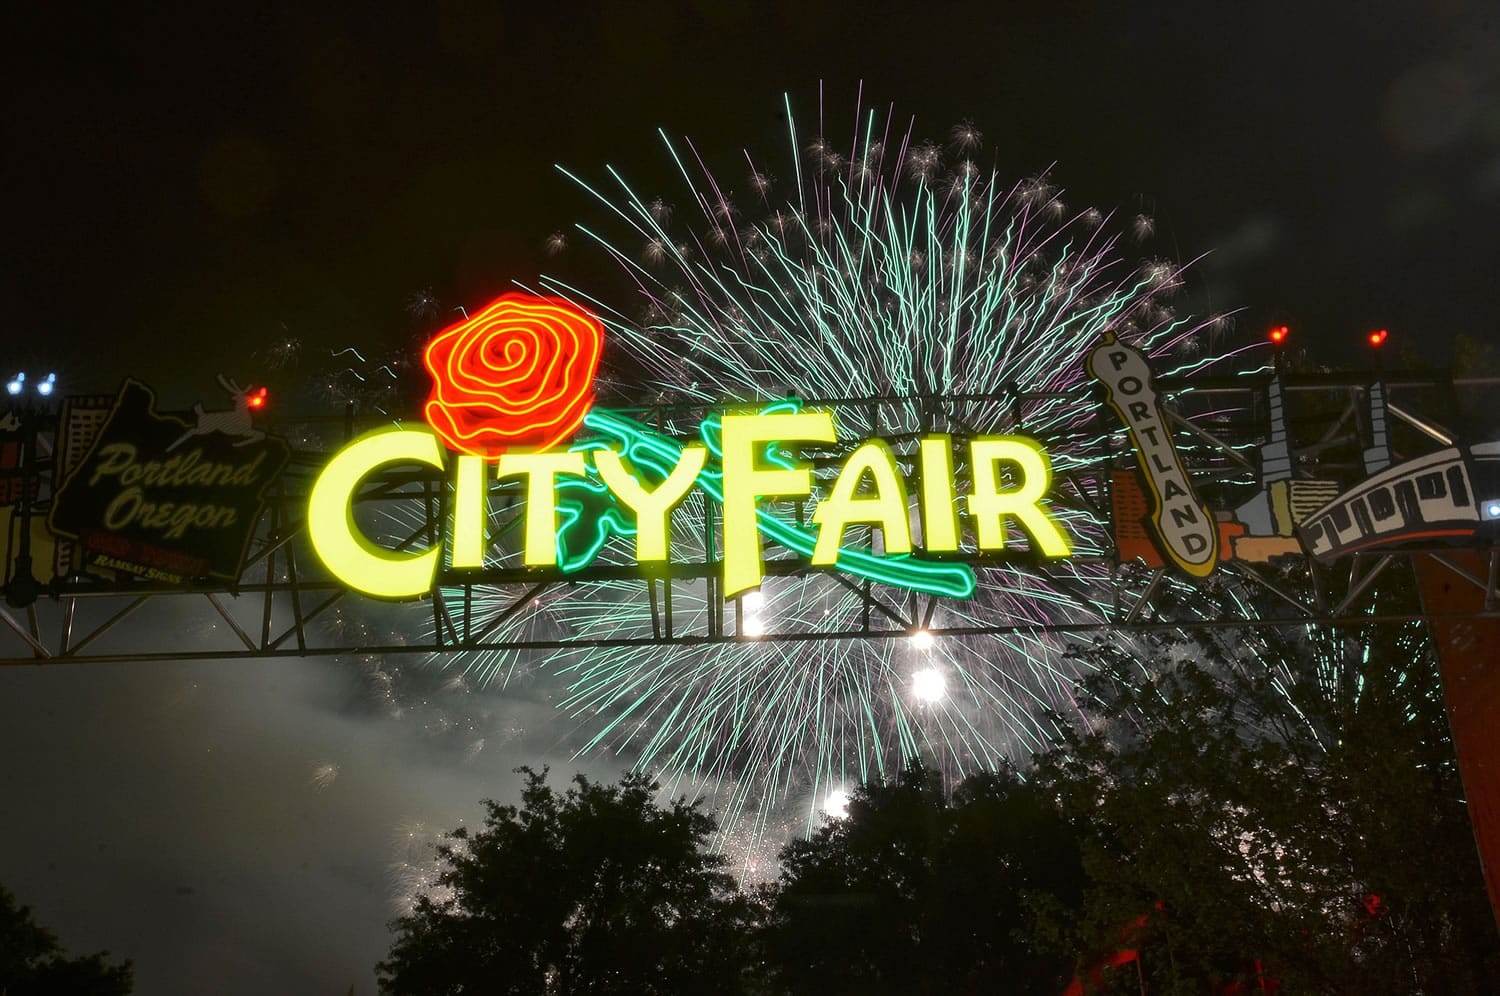 The CityFair at the Portland Rose Festival at the Tom McCall Waterfront Park.